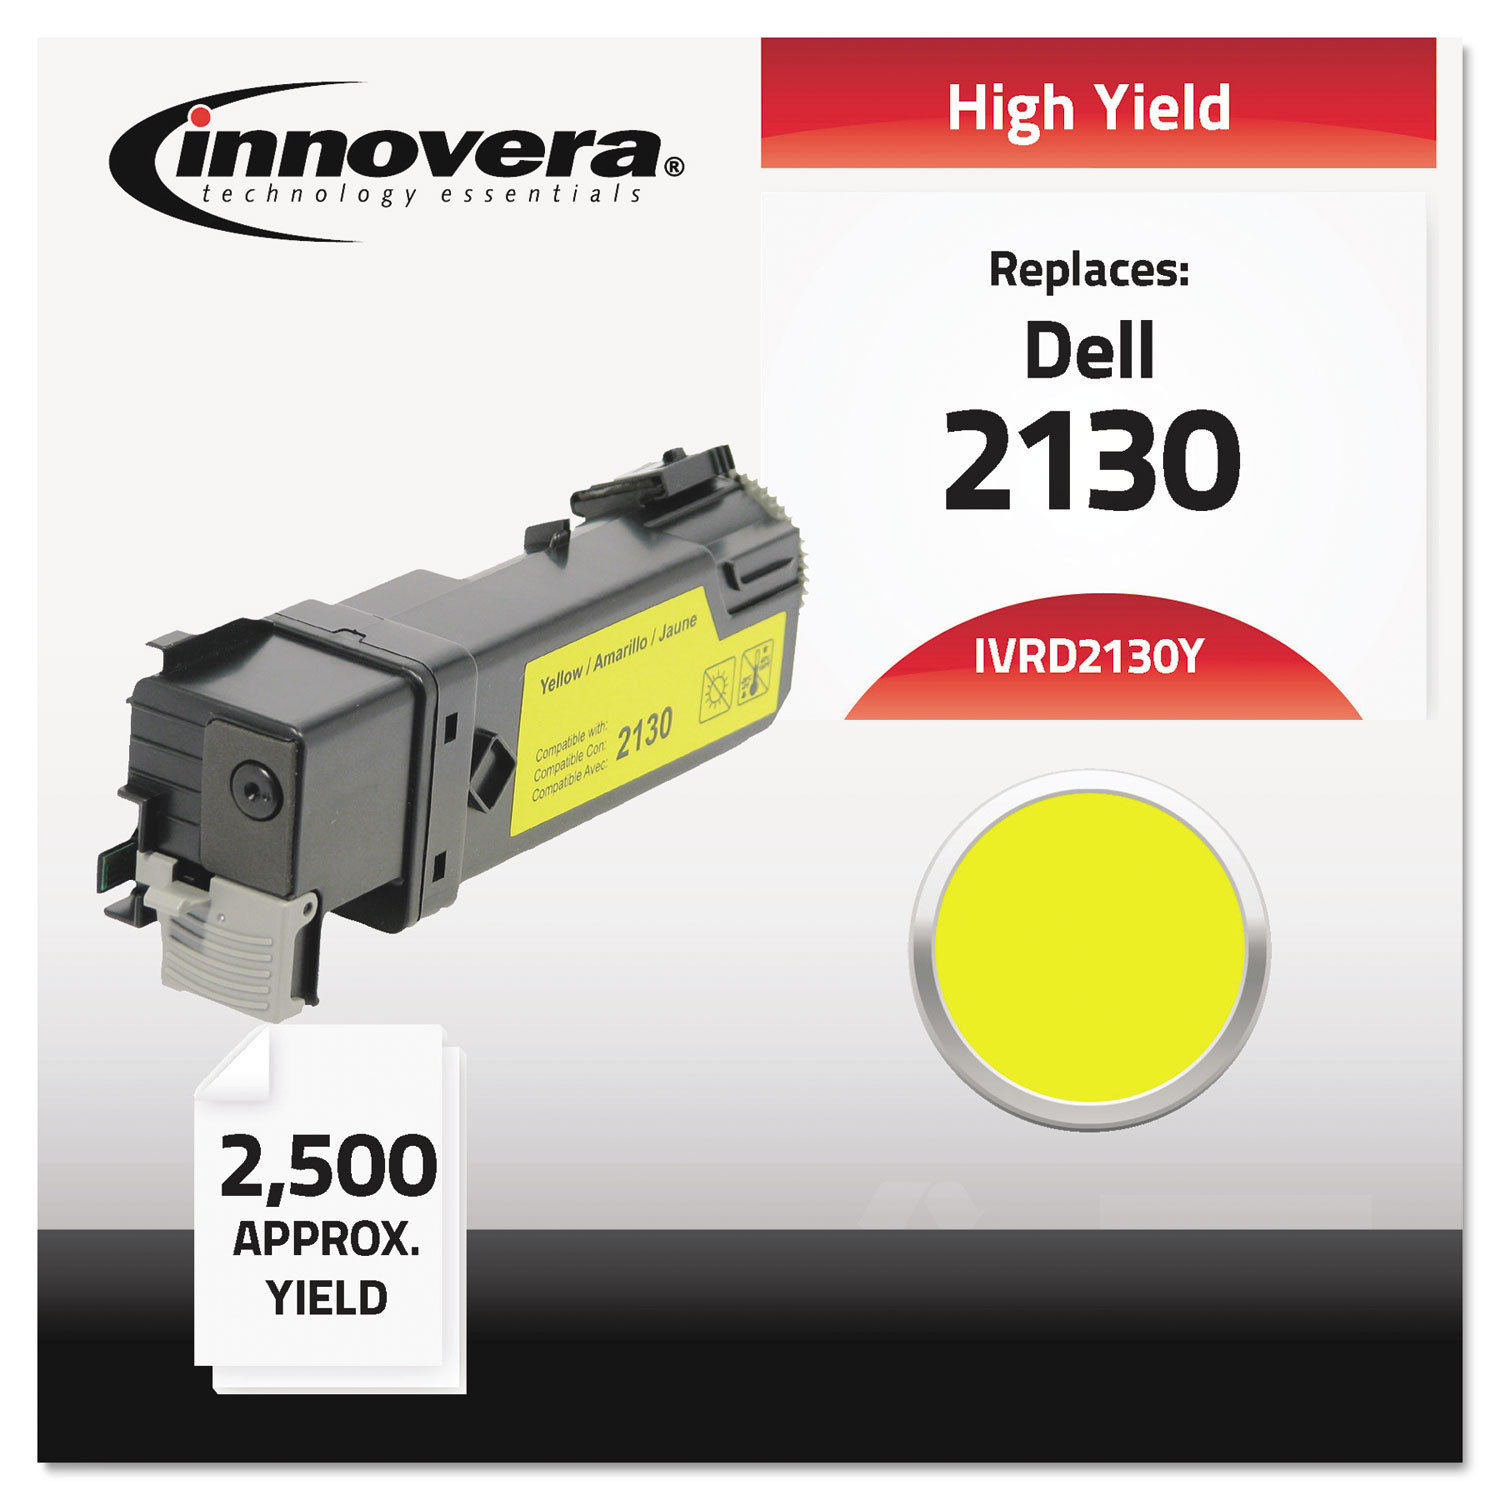  Innovera IVRD2130Y Remanufactured 330-1438 (2130) High-Yield Toner, 2500 Page-Yield, Yellow (IVRD2130Y) 